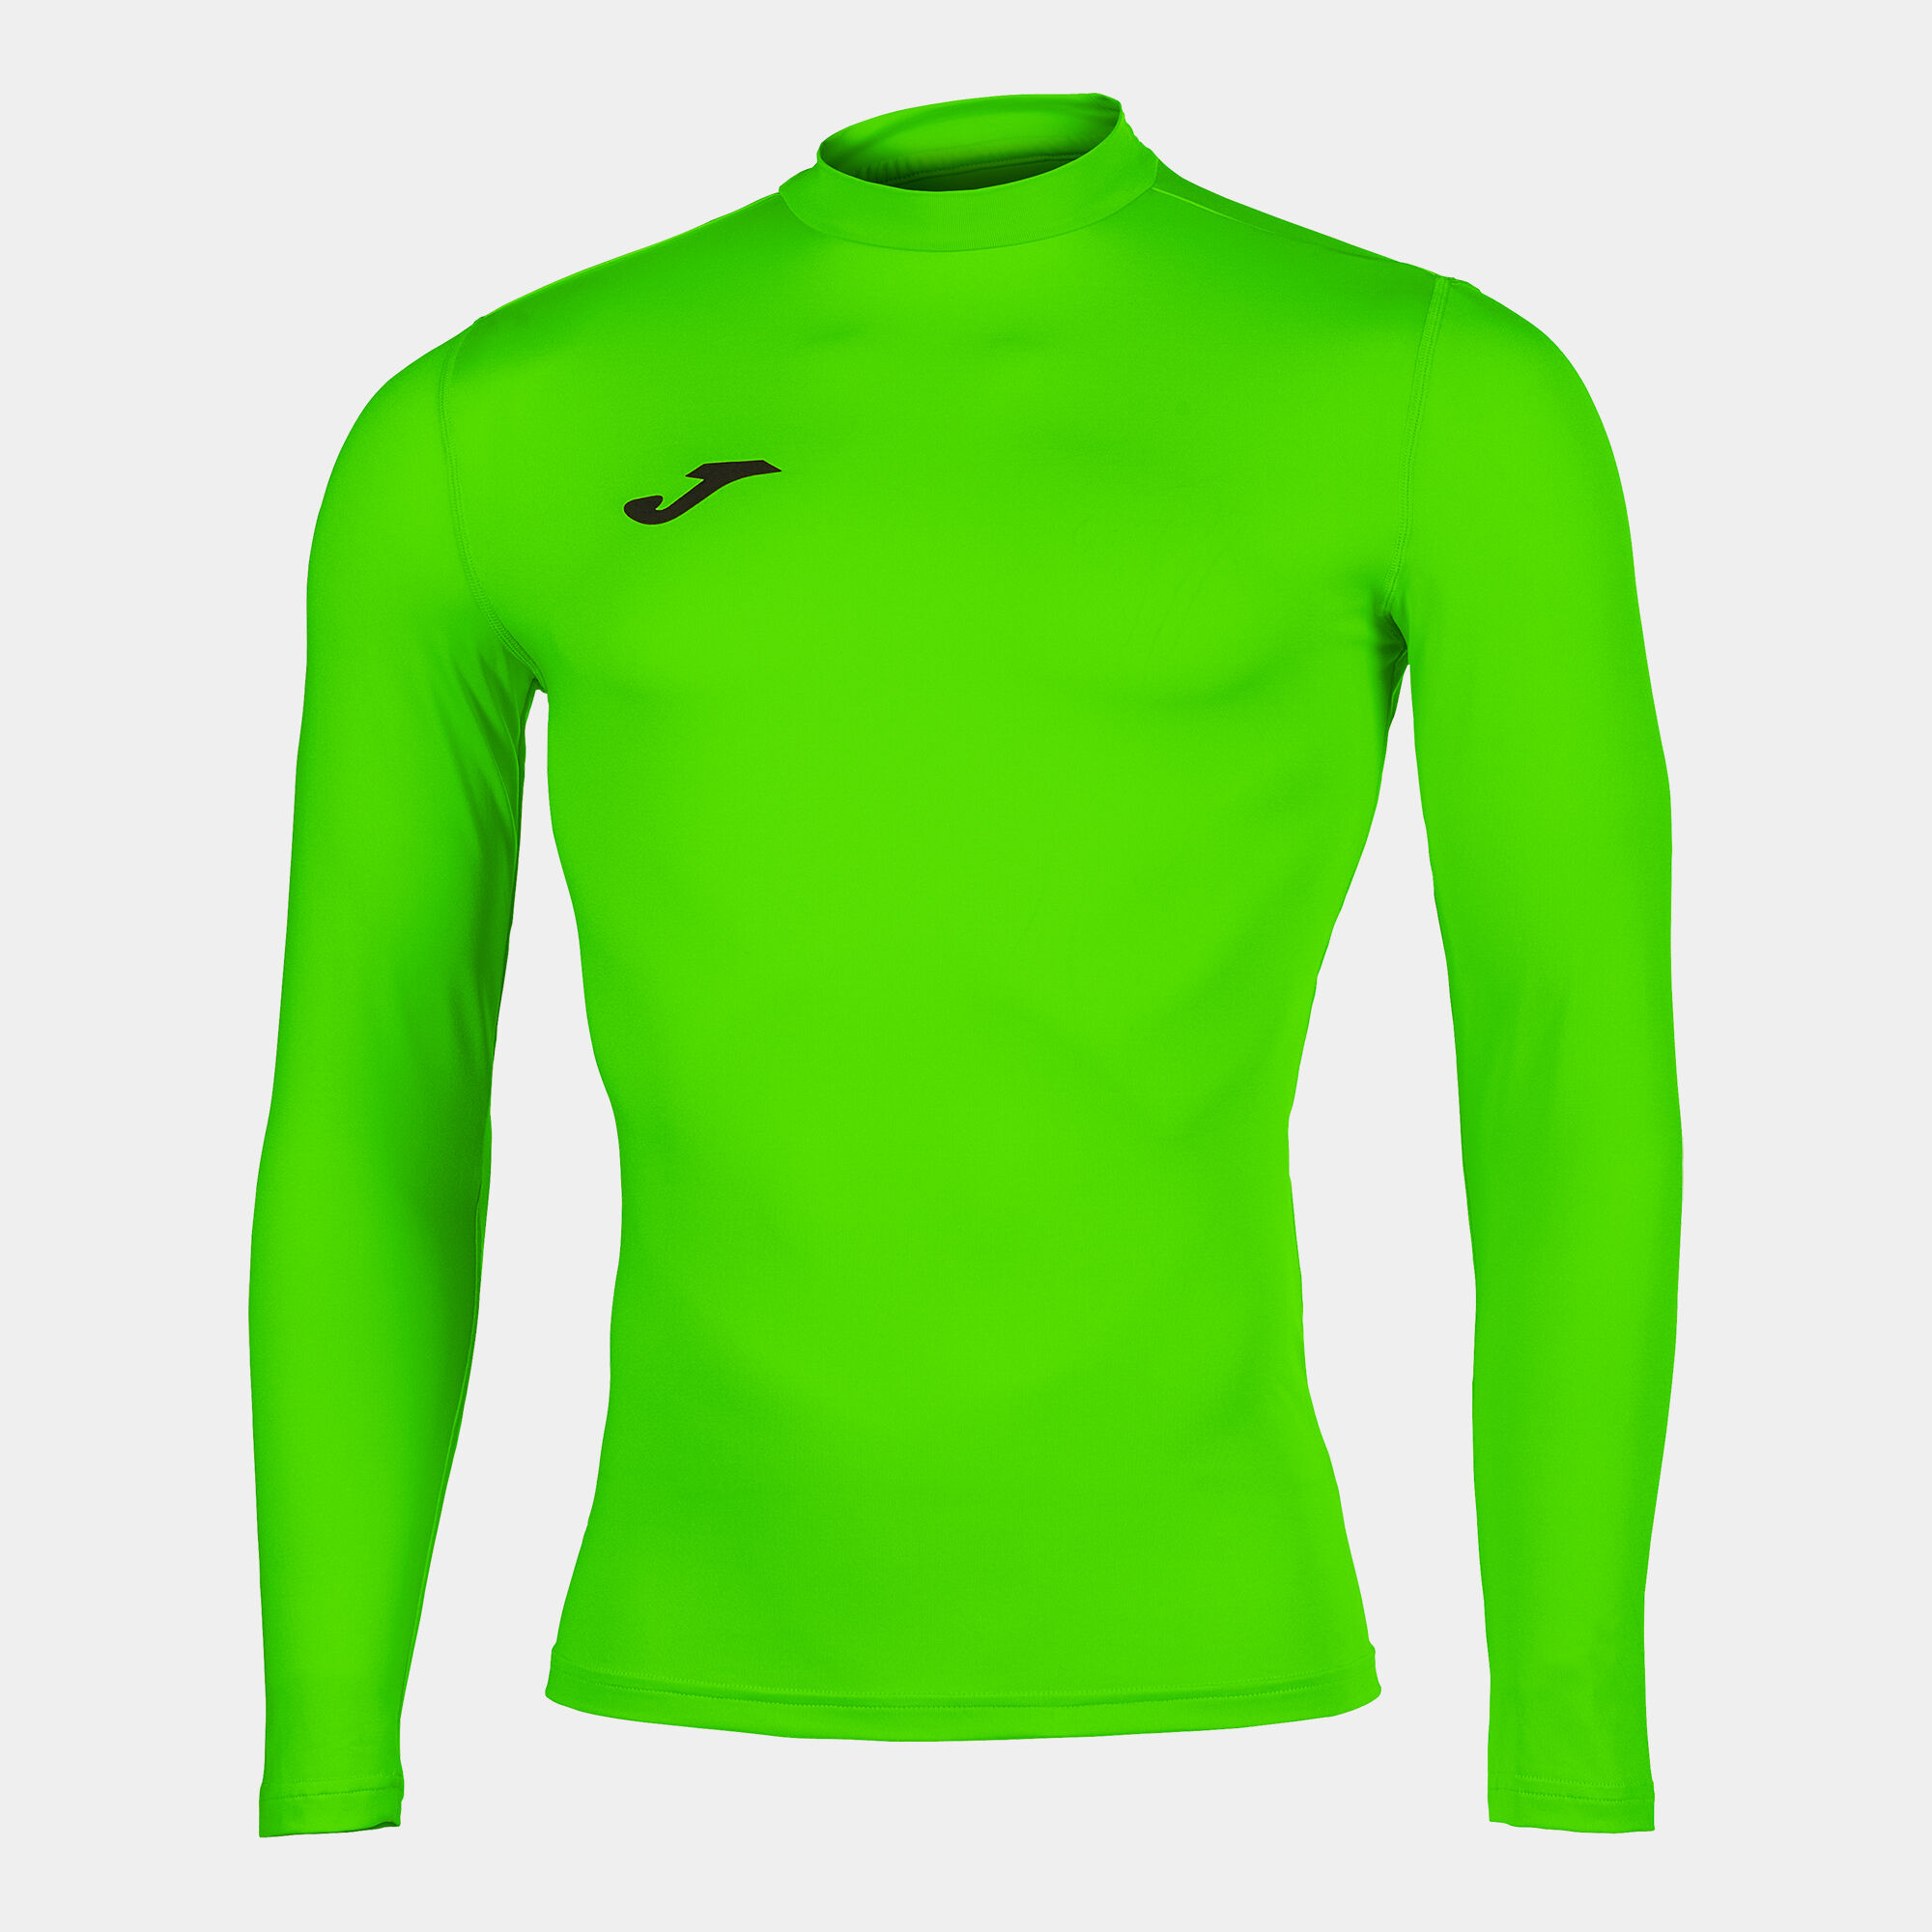 MAILLOT MANCHES LONGUES UNISEXE BRAMA ACADEMY VERT FLUO